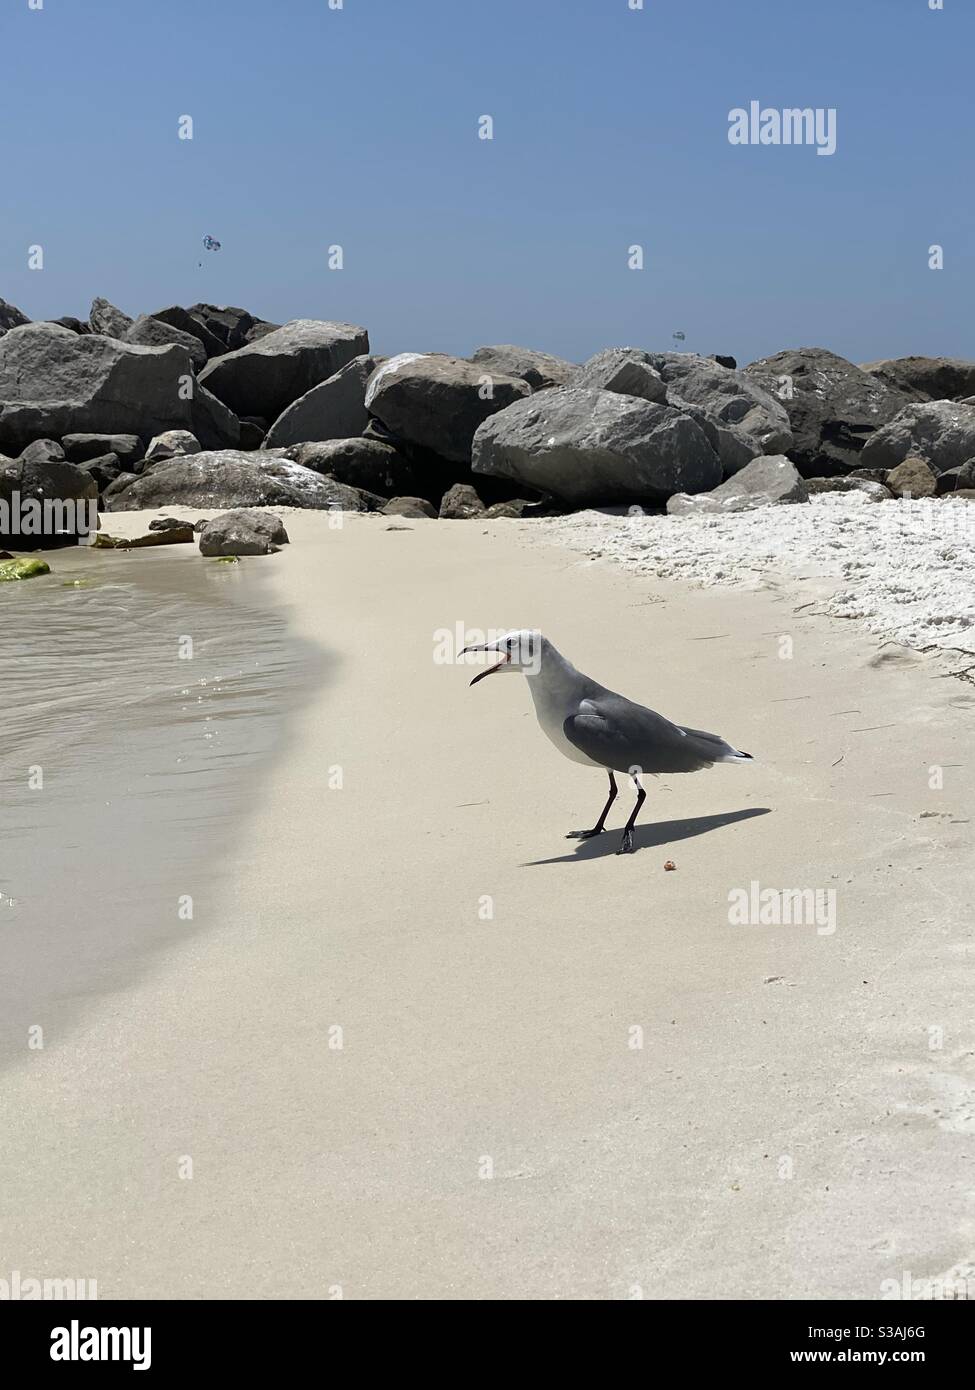 Seagull with its beak wide open standing on the sand Stock Photo